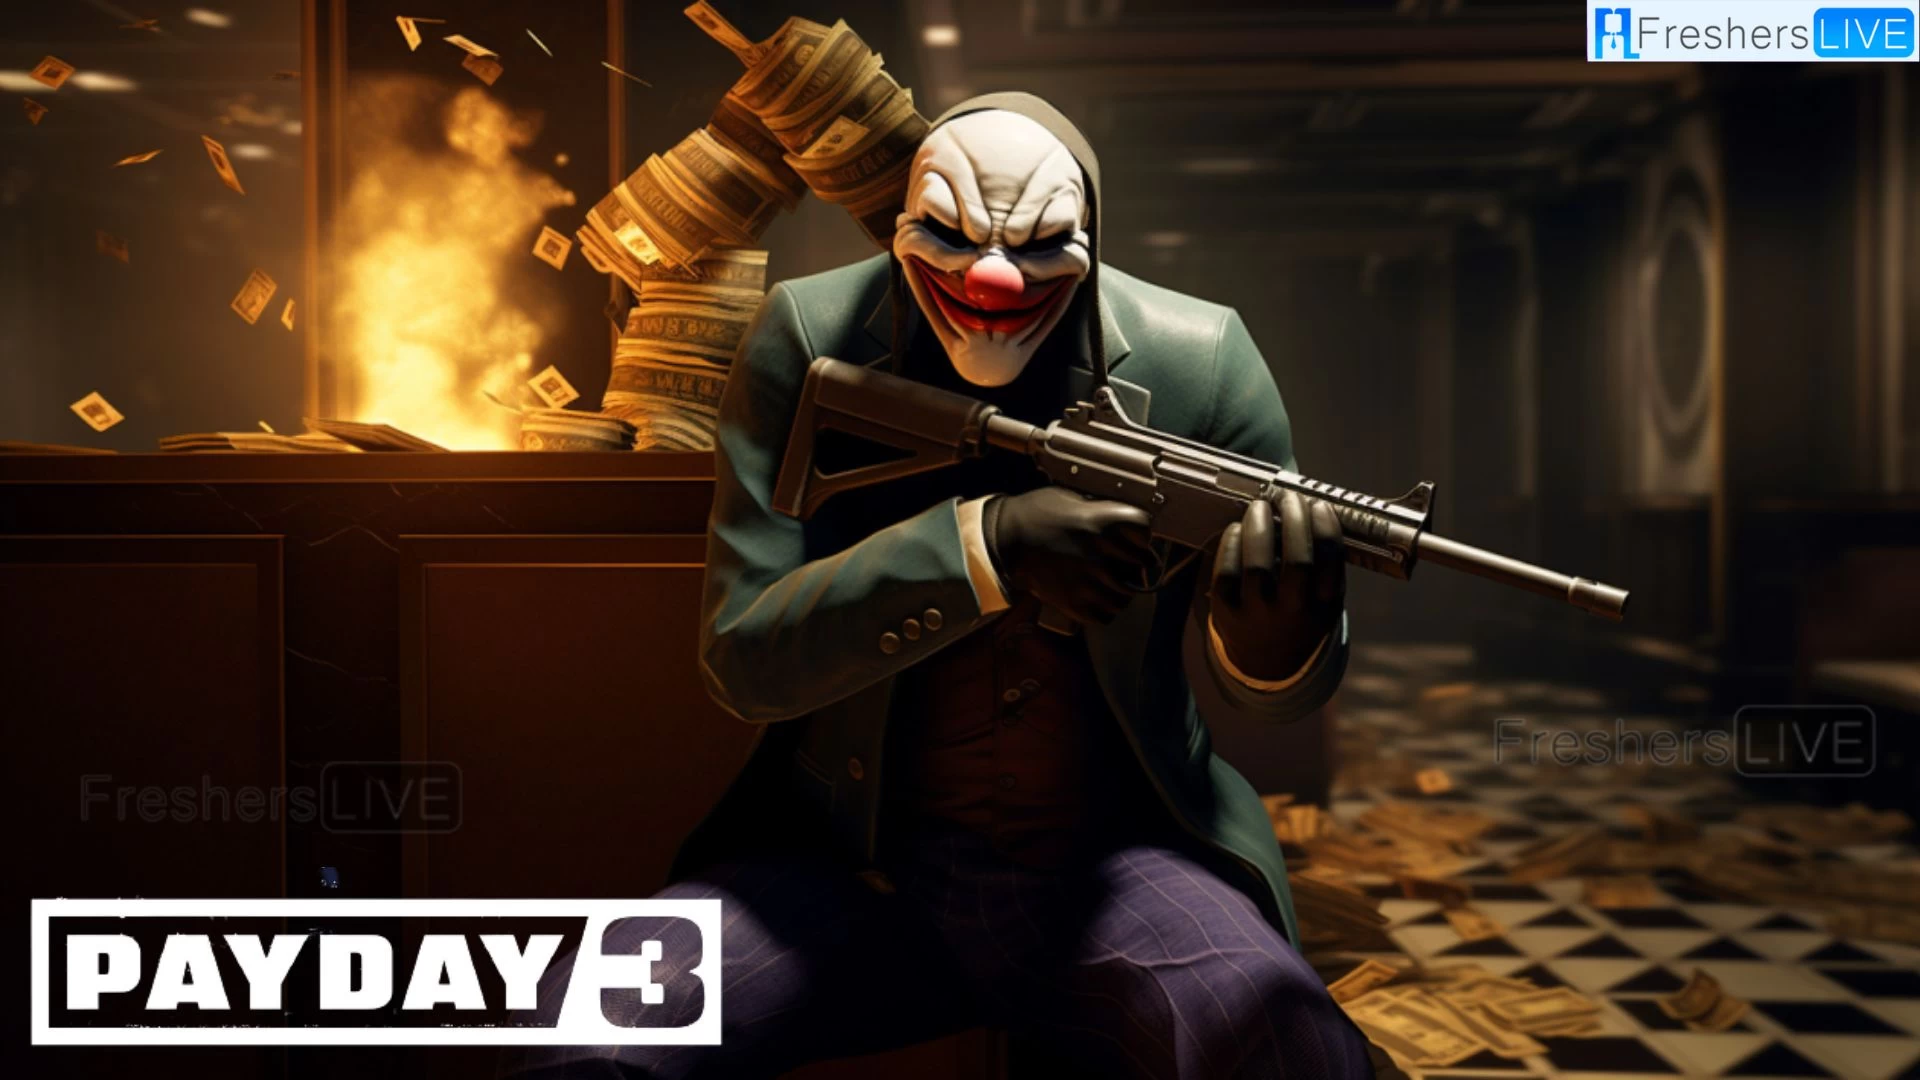 How to Break into the Armored Truck in Payday 3? Know Here